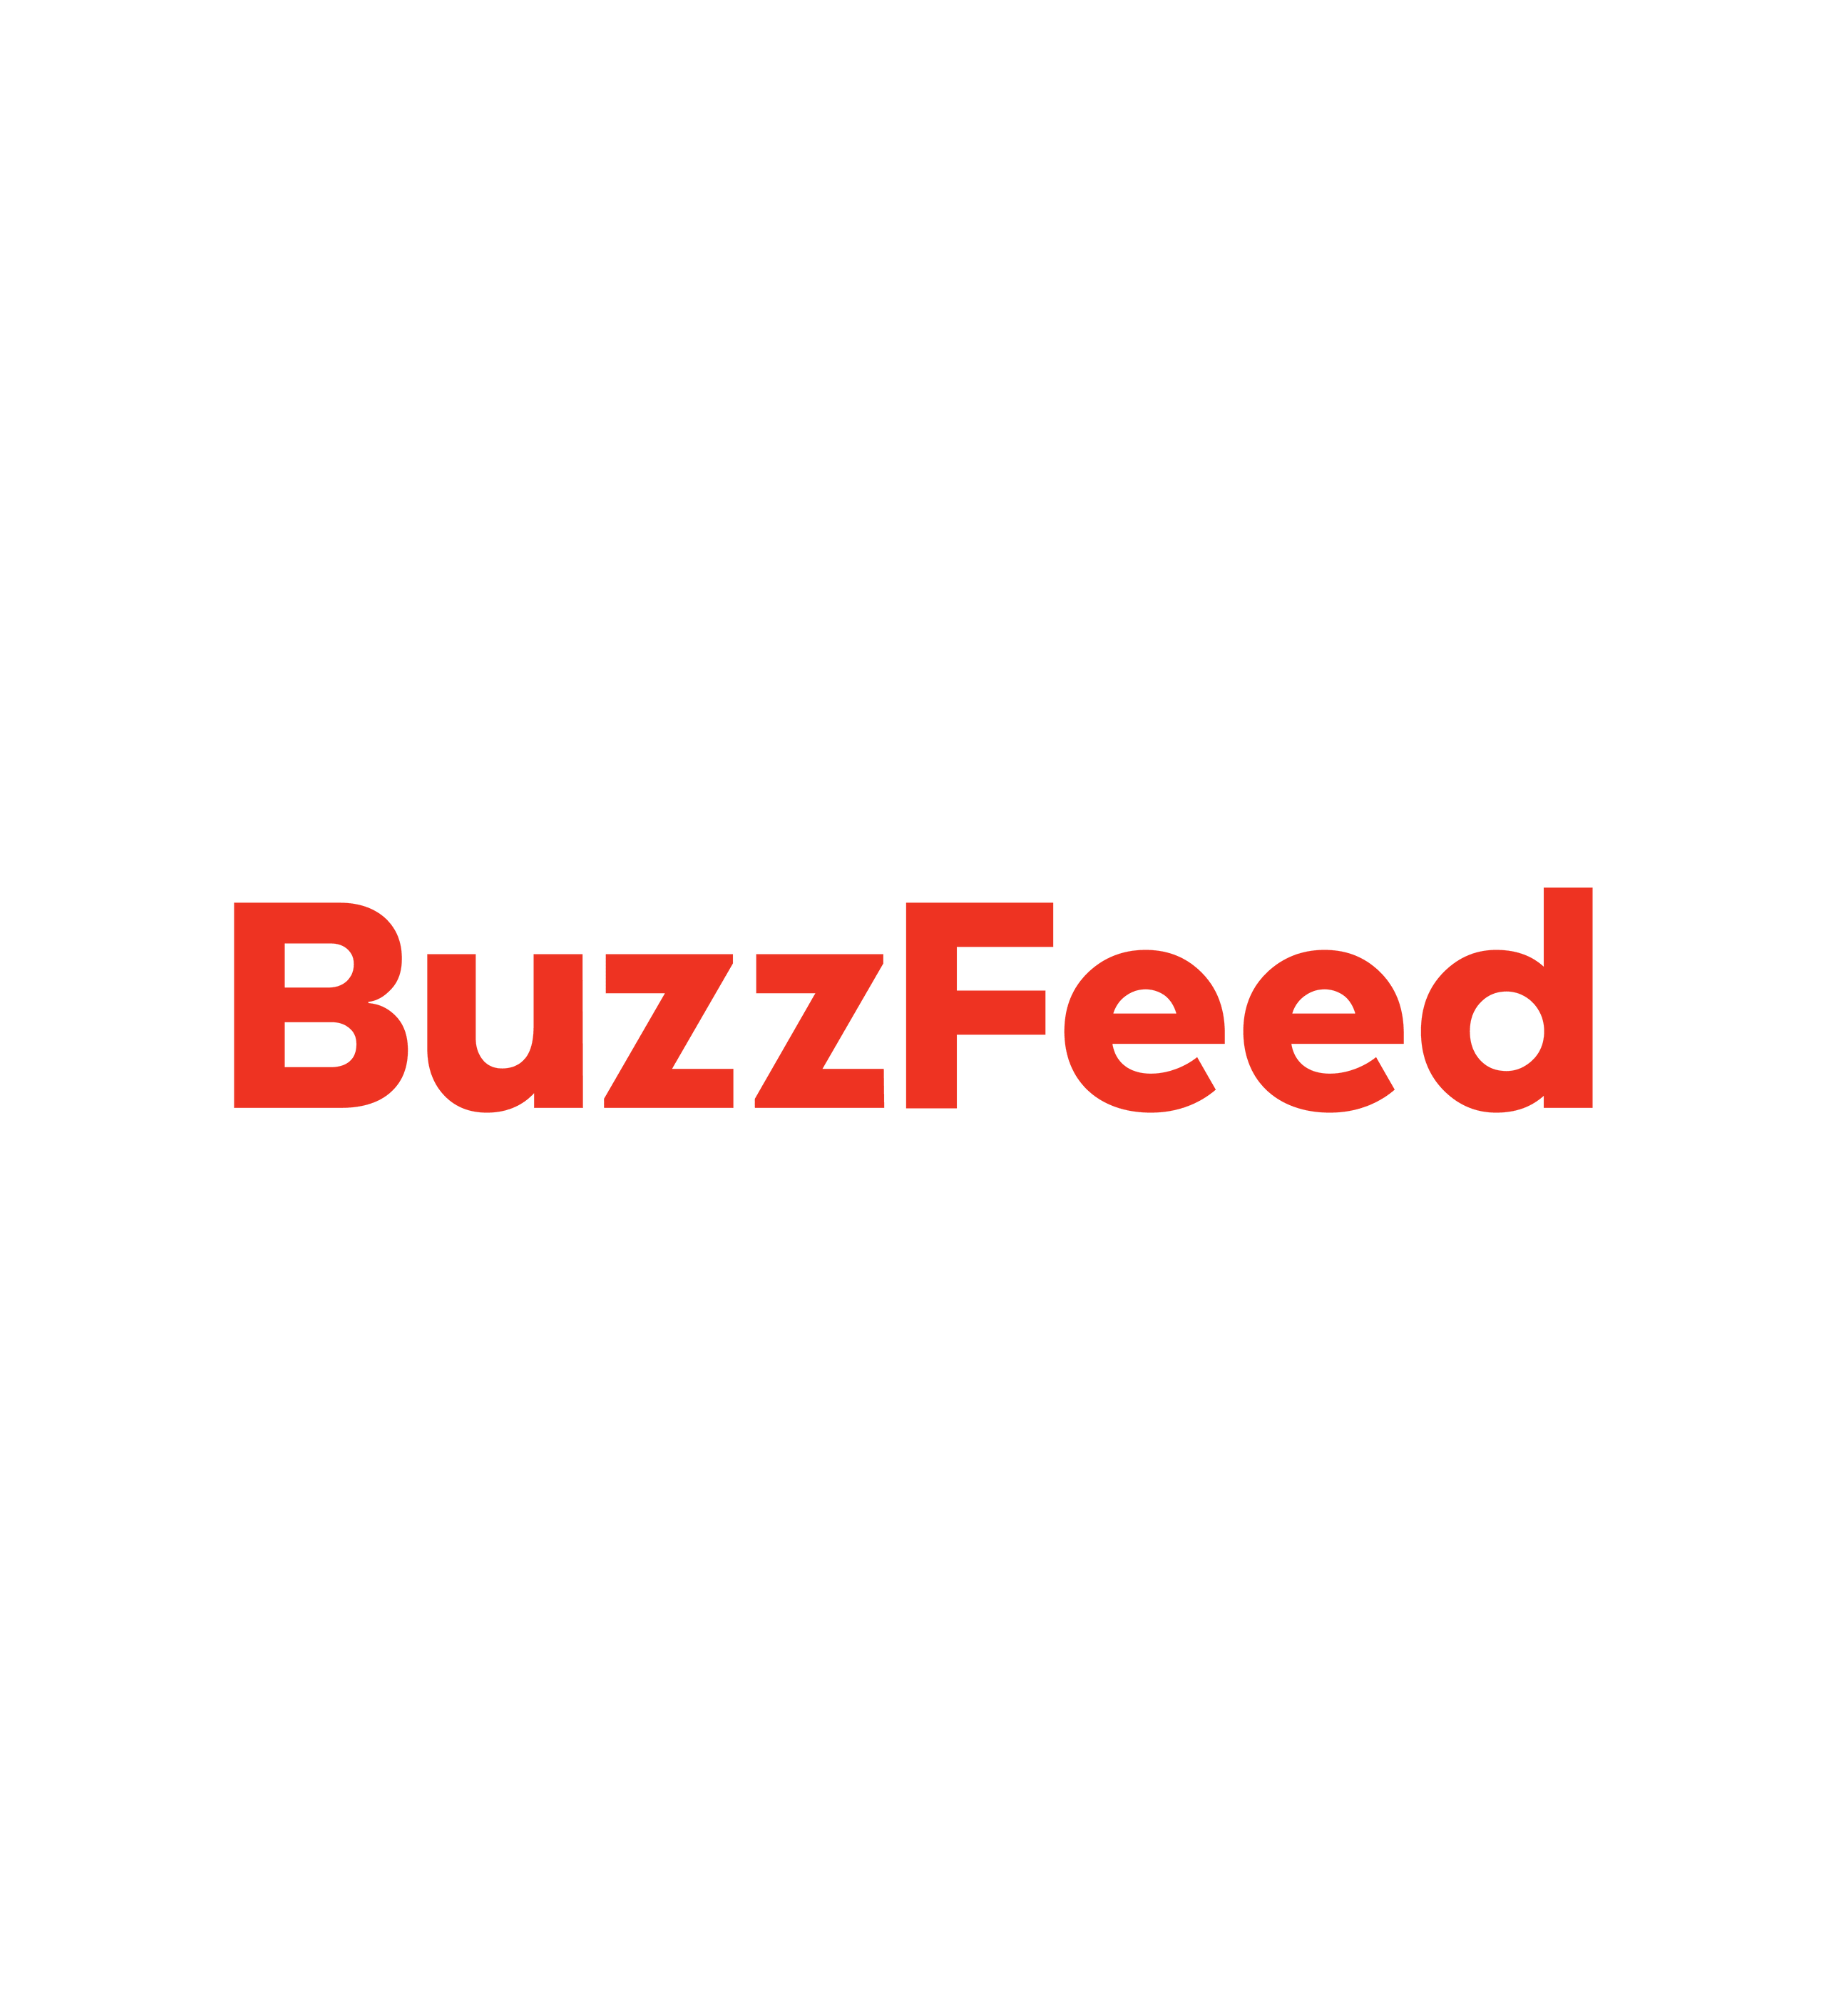 BUZZFEED.png